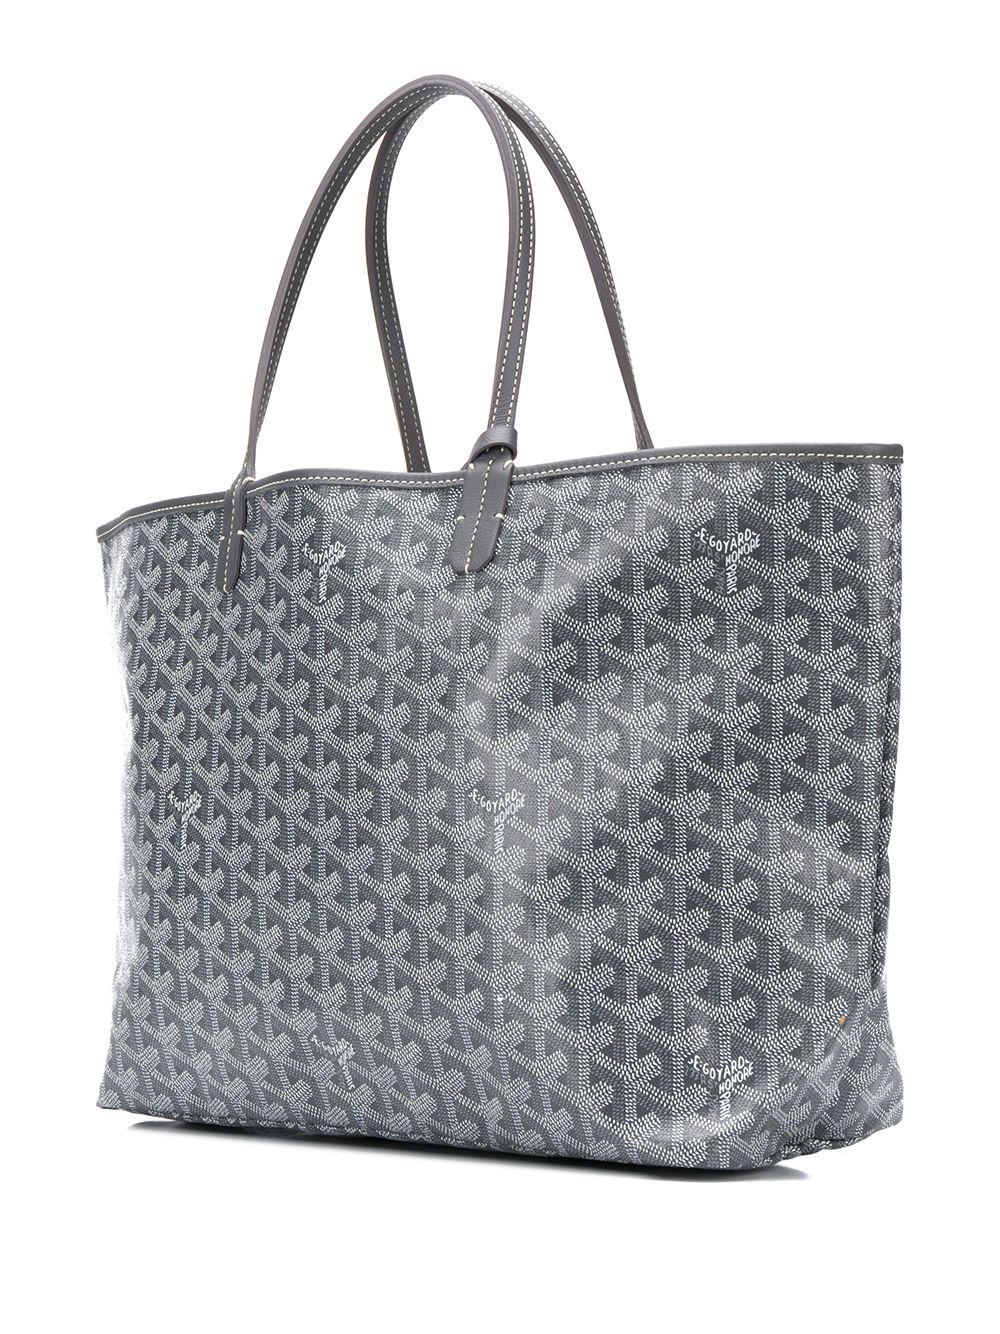 Originally designed as a beach bag, the St Louis bag was a reference to King Louis IX of France. Its grey monogram leather displays a kaleidoscope of hand-painted butterflies. The Goyard St Louis handbag is distinctive for its shopper silhouette,